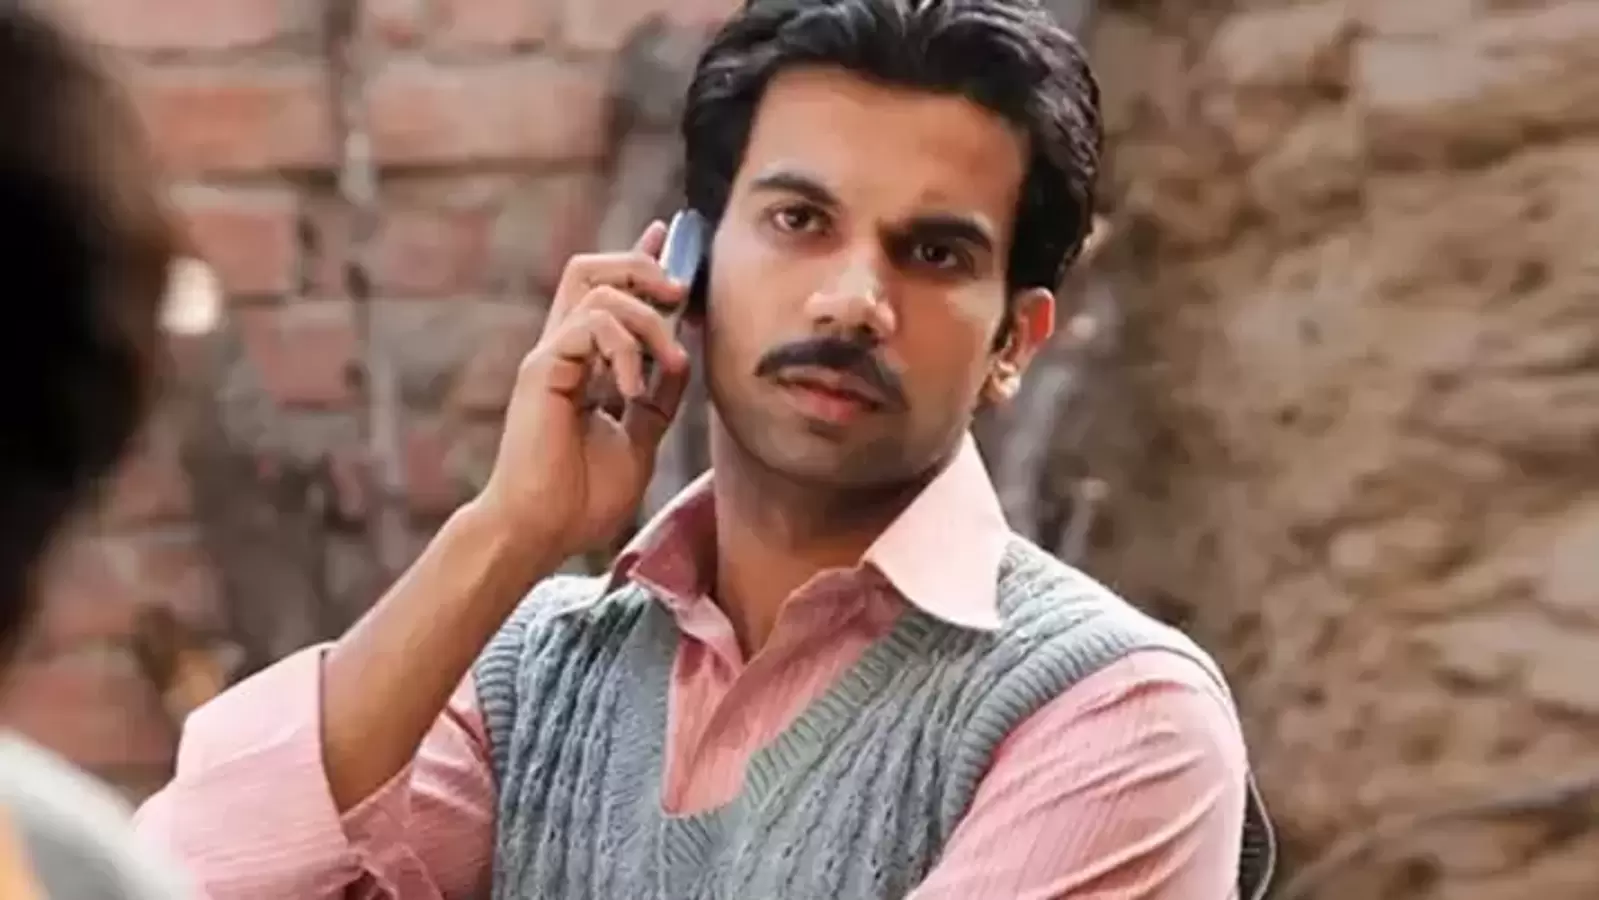 Rajkummar Rao reveals he was to play lead in Gangs of Wasseypur initially: ‘After writing finished 3-4 months later…’